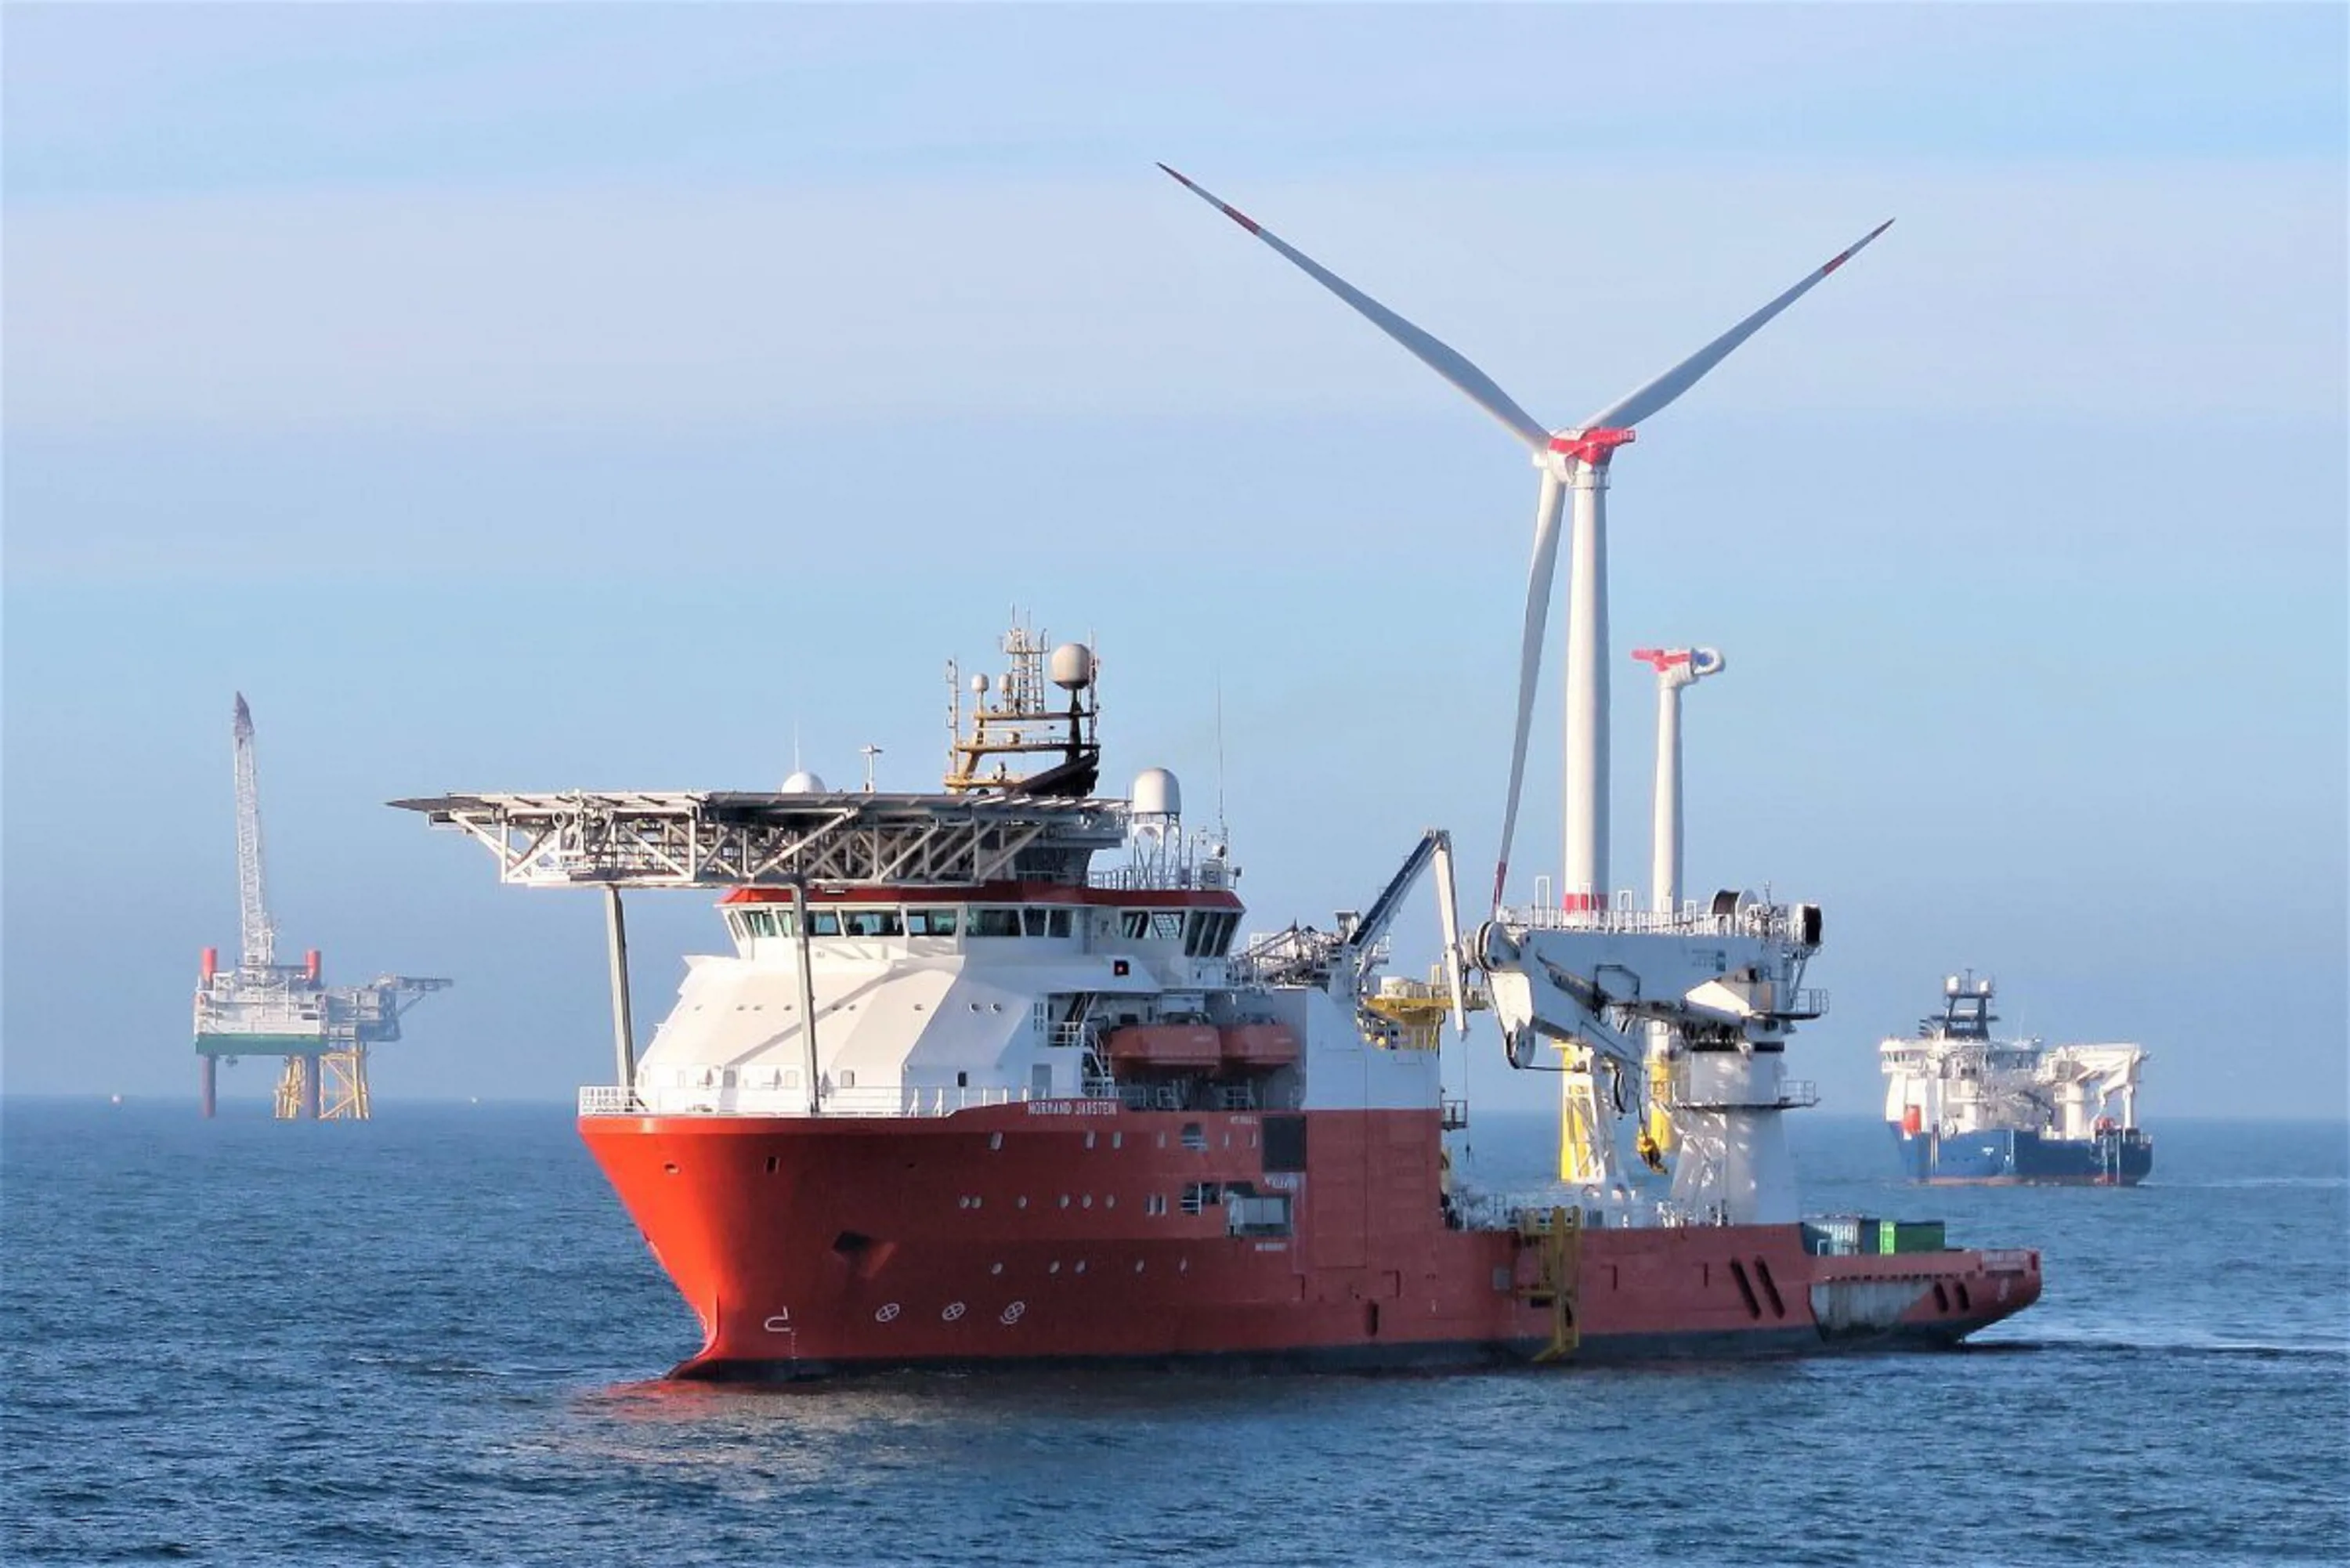 Offshore ROV construction vessel at an offshore wind farm location